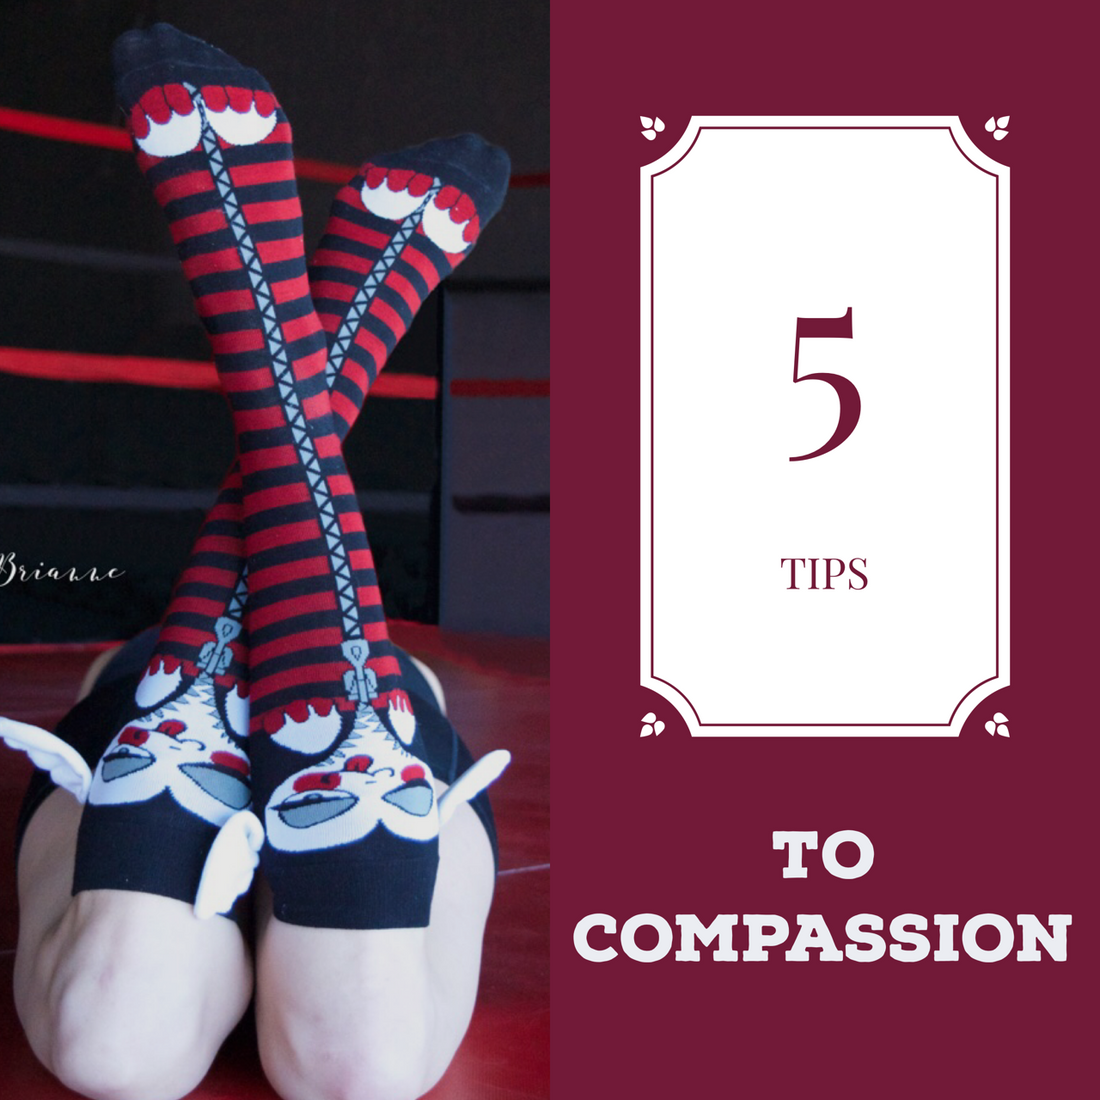 5 TIPS FOR COMPASSION